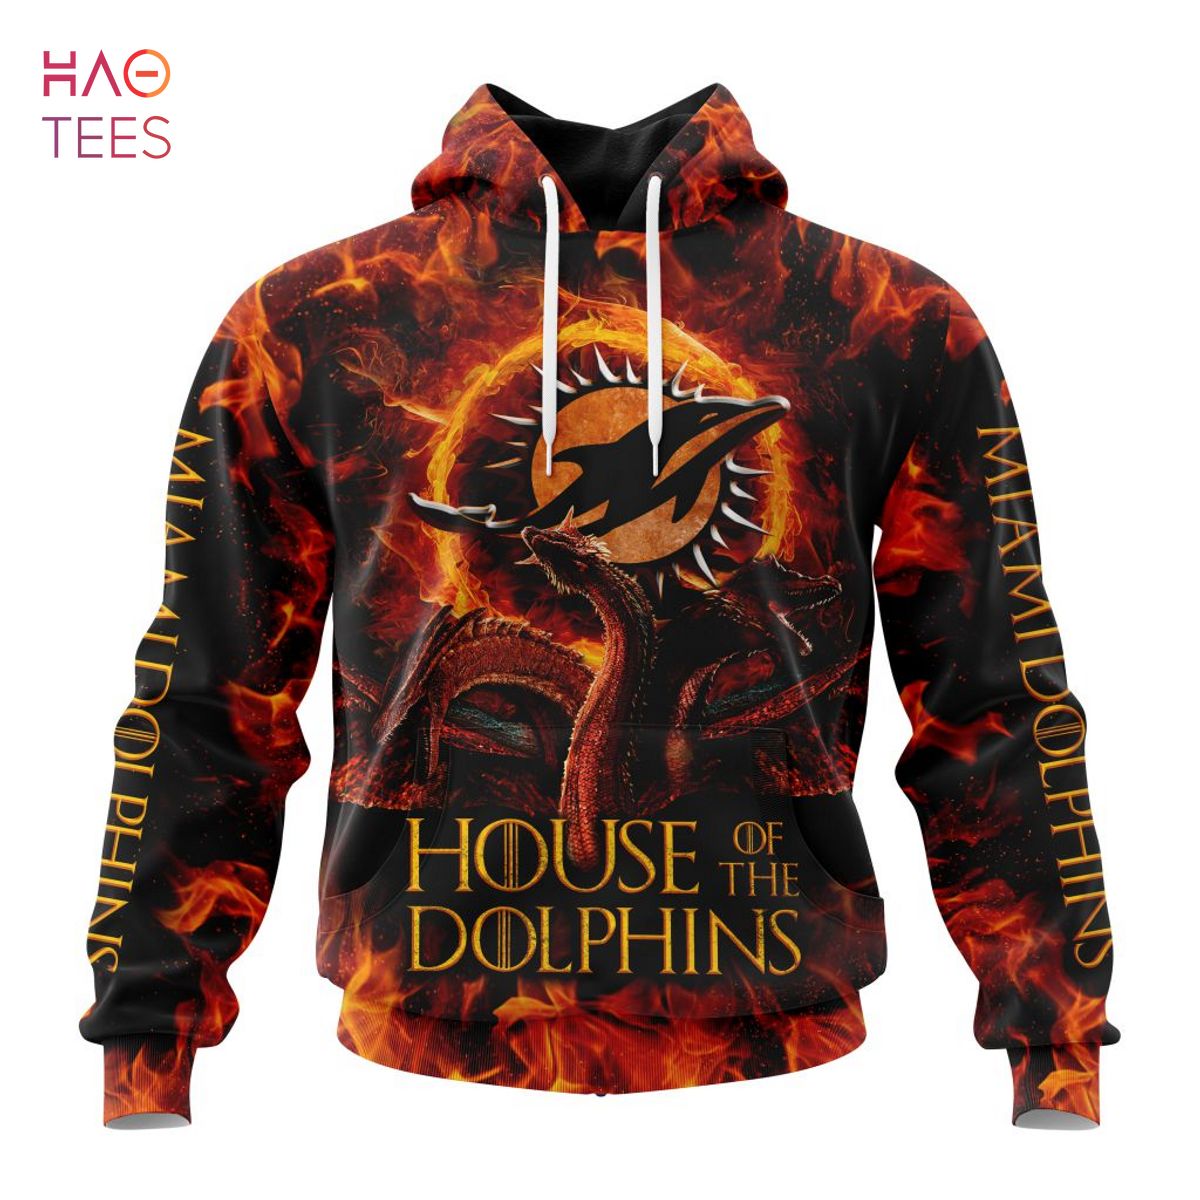 Miami Dolphins Shop - nfl miami dolphins game of thrones house of the dolphins hoodie 3d26471